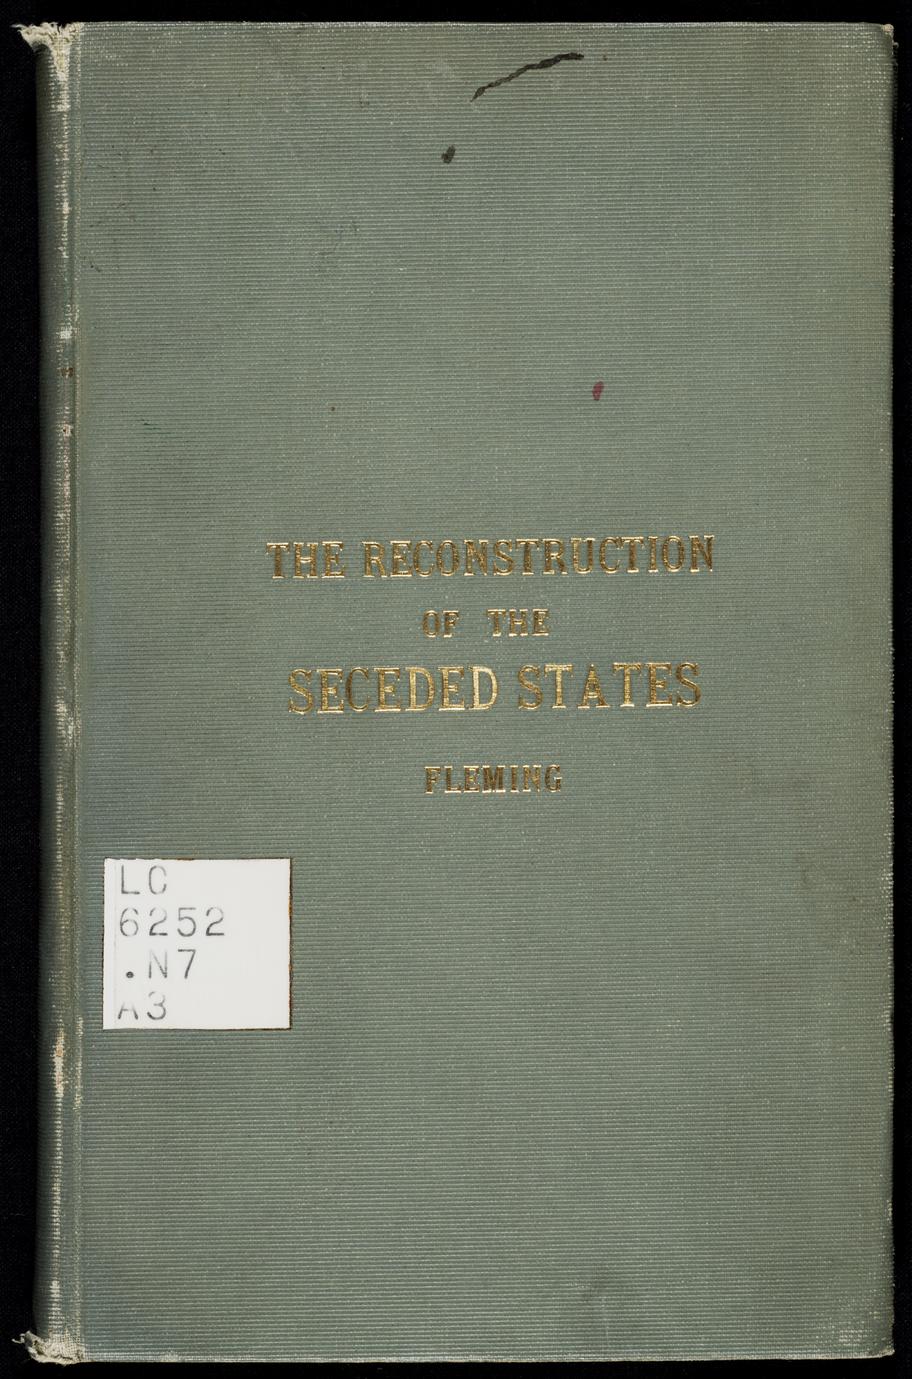 The reconstruction of the seceded states, 1865-76 (1 of 2)